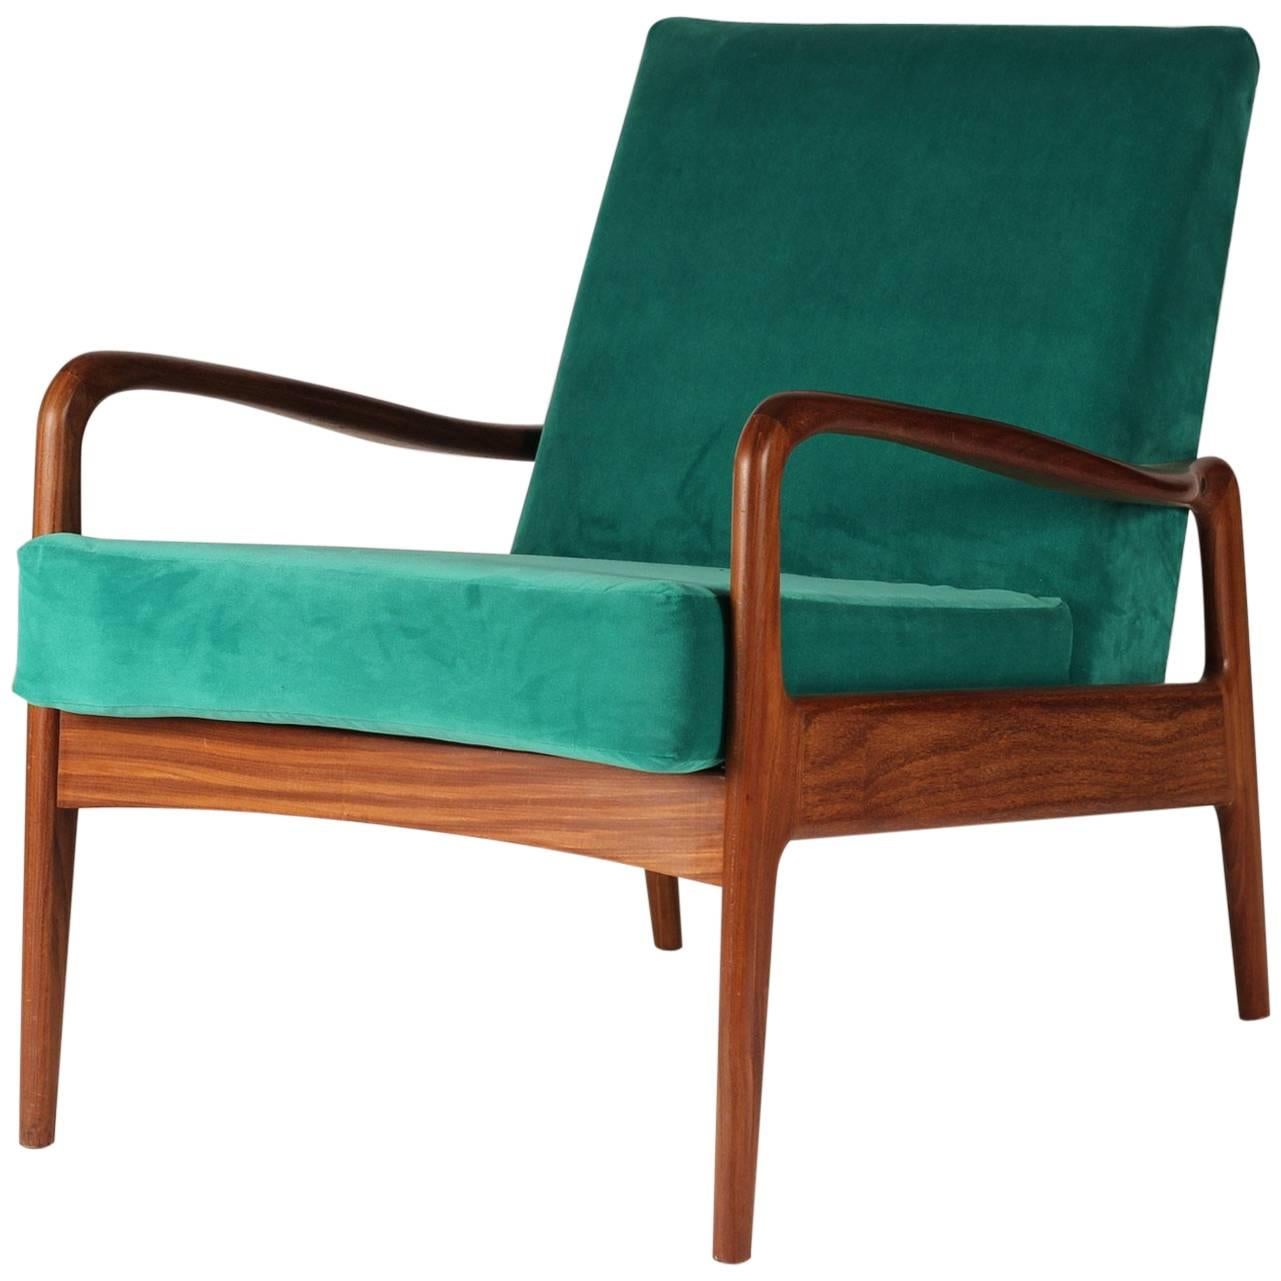 Greaves & Thomas Lounge Chair